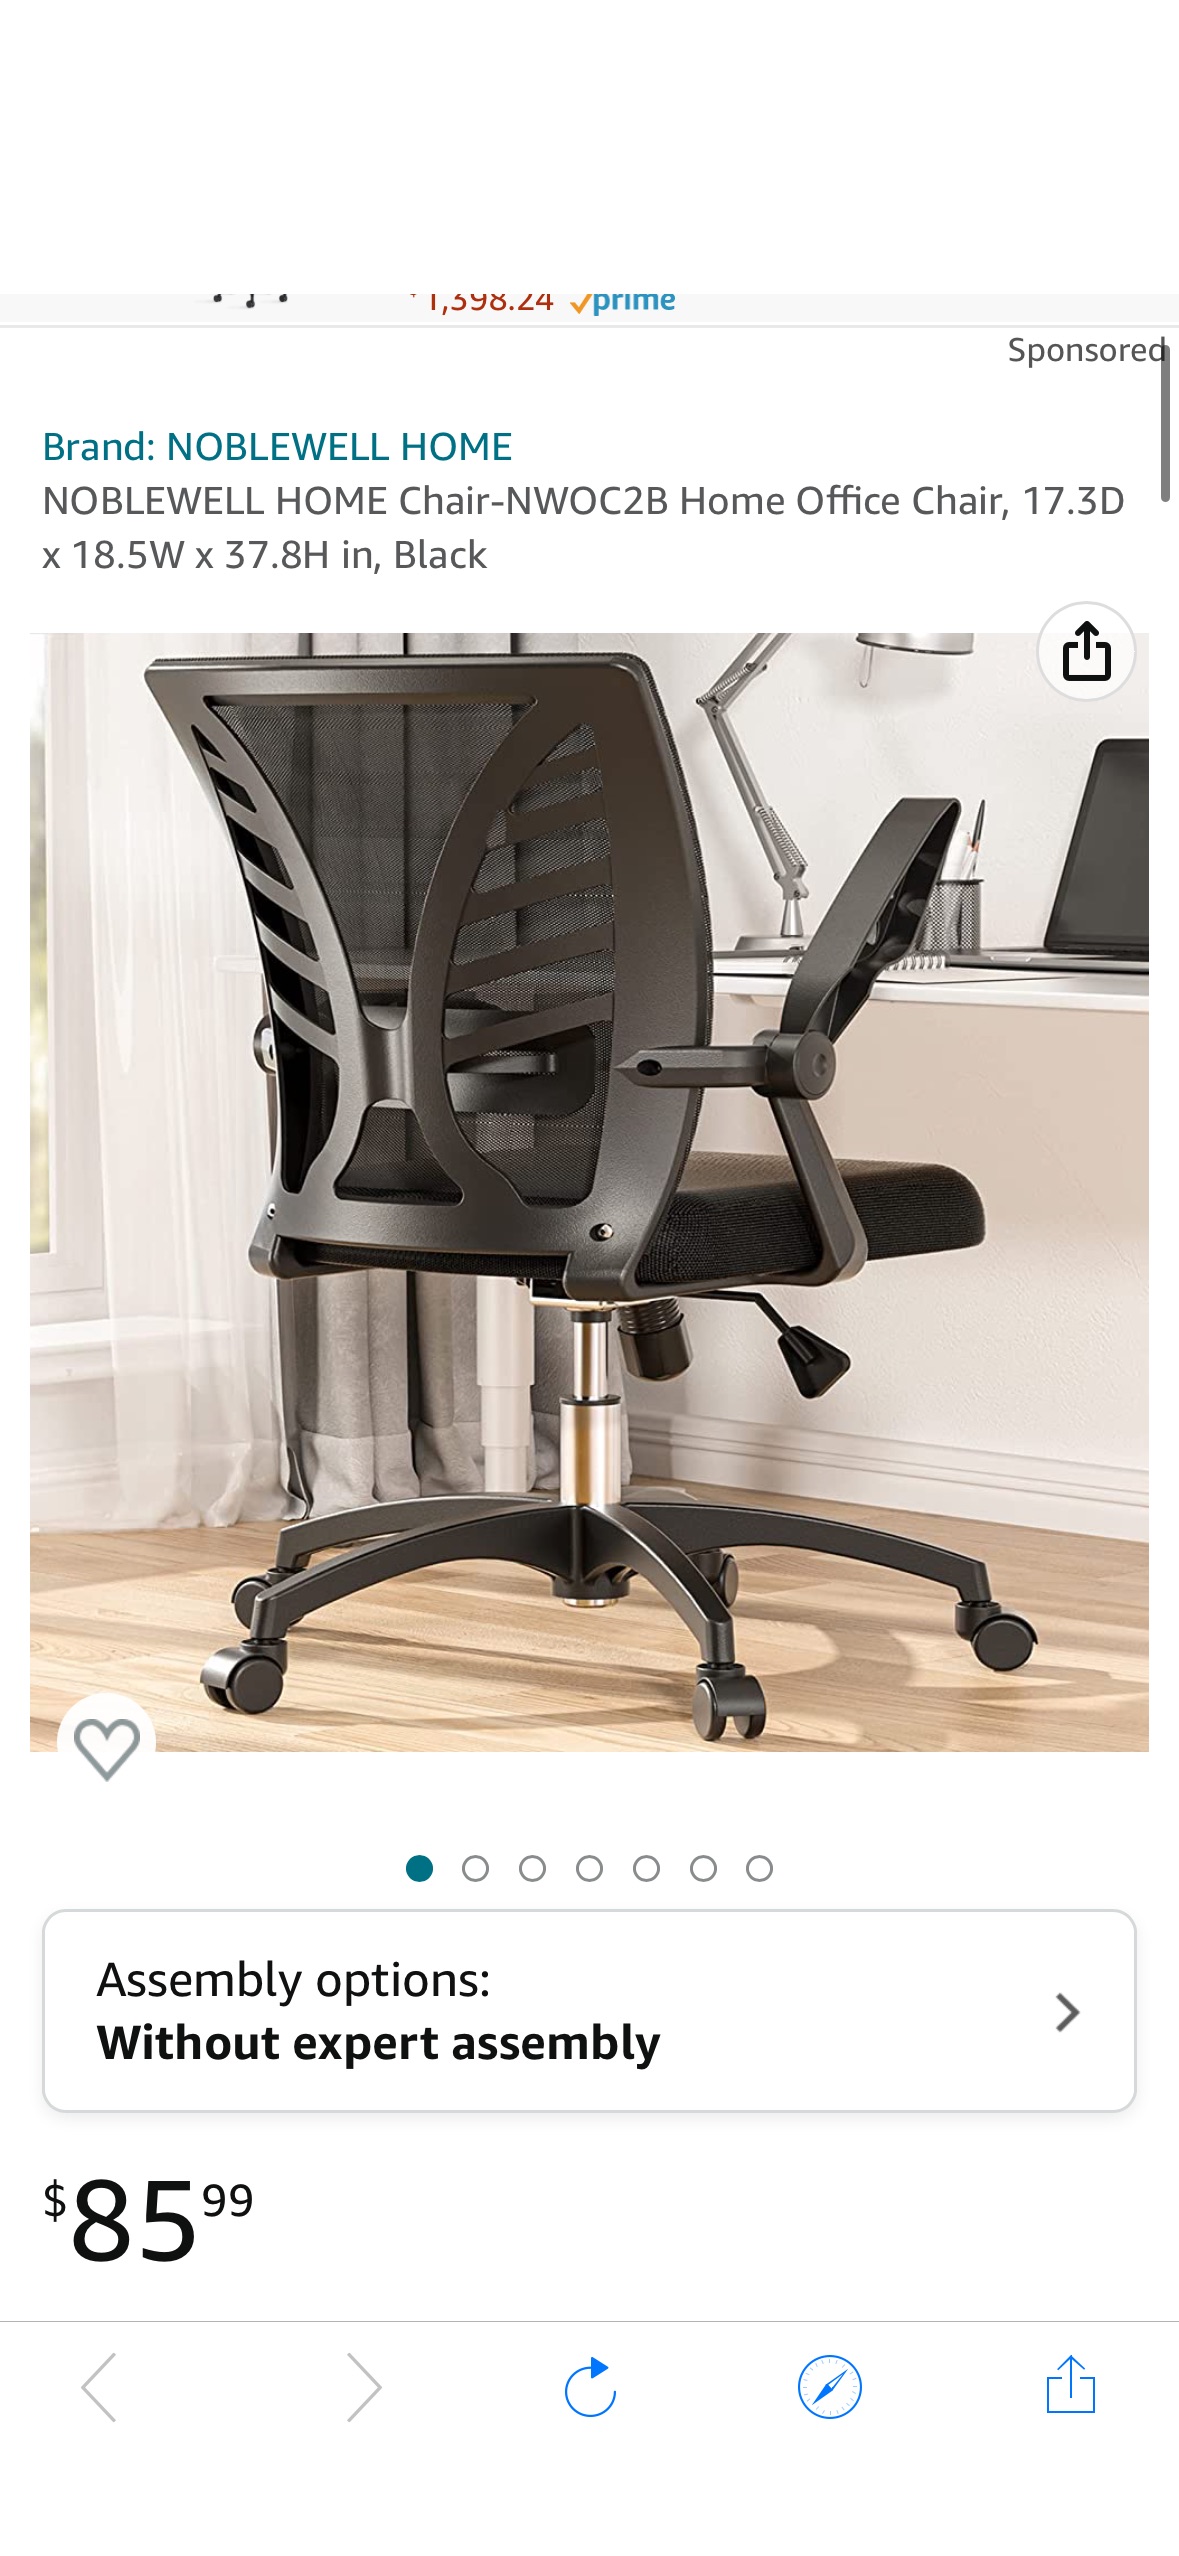 Amazon.com: NOBLEWELL HOME Chair-NWOC2B Home Office Chair, 17.3D x 18.5W x 37.8H in, Black : Home & Kitchen